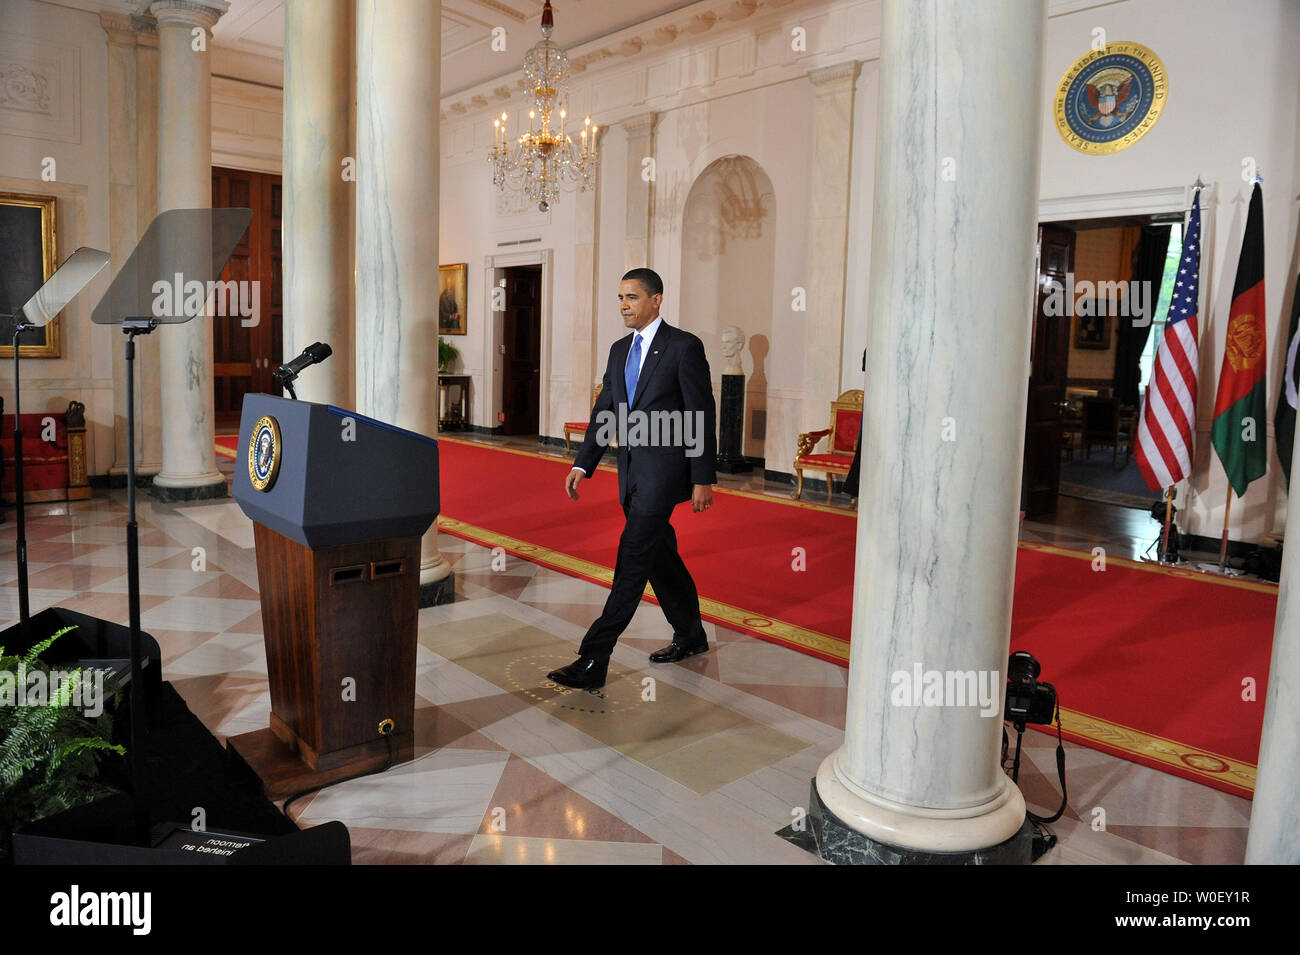 U.S. President Barack Obama walks to the podium to deliver remarks after meeting with Pakistan President Asif Ali Zardari and Afghanistan President Hamid Karzai in the Grad Foyer at the White House in Washington on May 6, 2009. (UPI Photo/Kevin Dietsch) Stock Photo